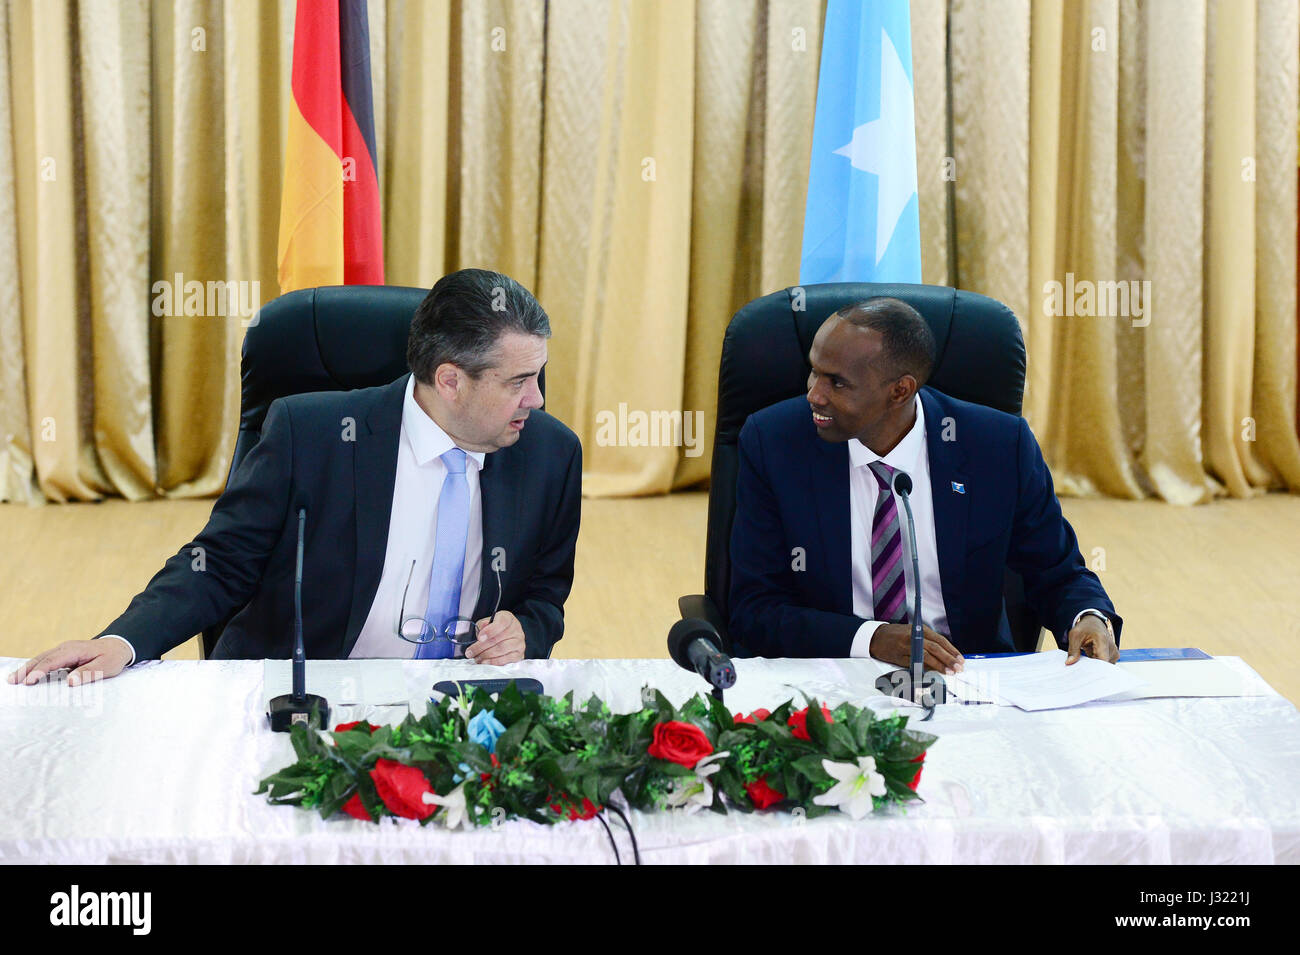 Mogadischu, Somalia. 2nd May, 2017. German foreign minister Sigmar Gabriel (SPD, R) meets Hassan Ali Khairei, the prime minister of Somalia, in Mogadischu, Somalia, 2 May 2017. Gabriel is on the second day of his visit to Africa. Photo: Maurizio Gambarini/dpa/Alamy Live News Stock Photo